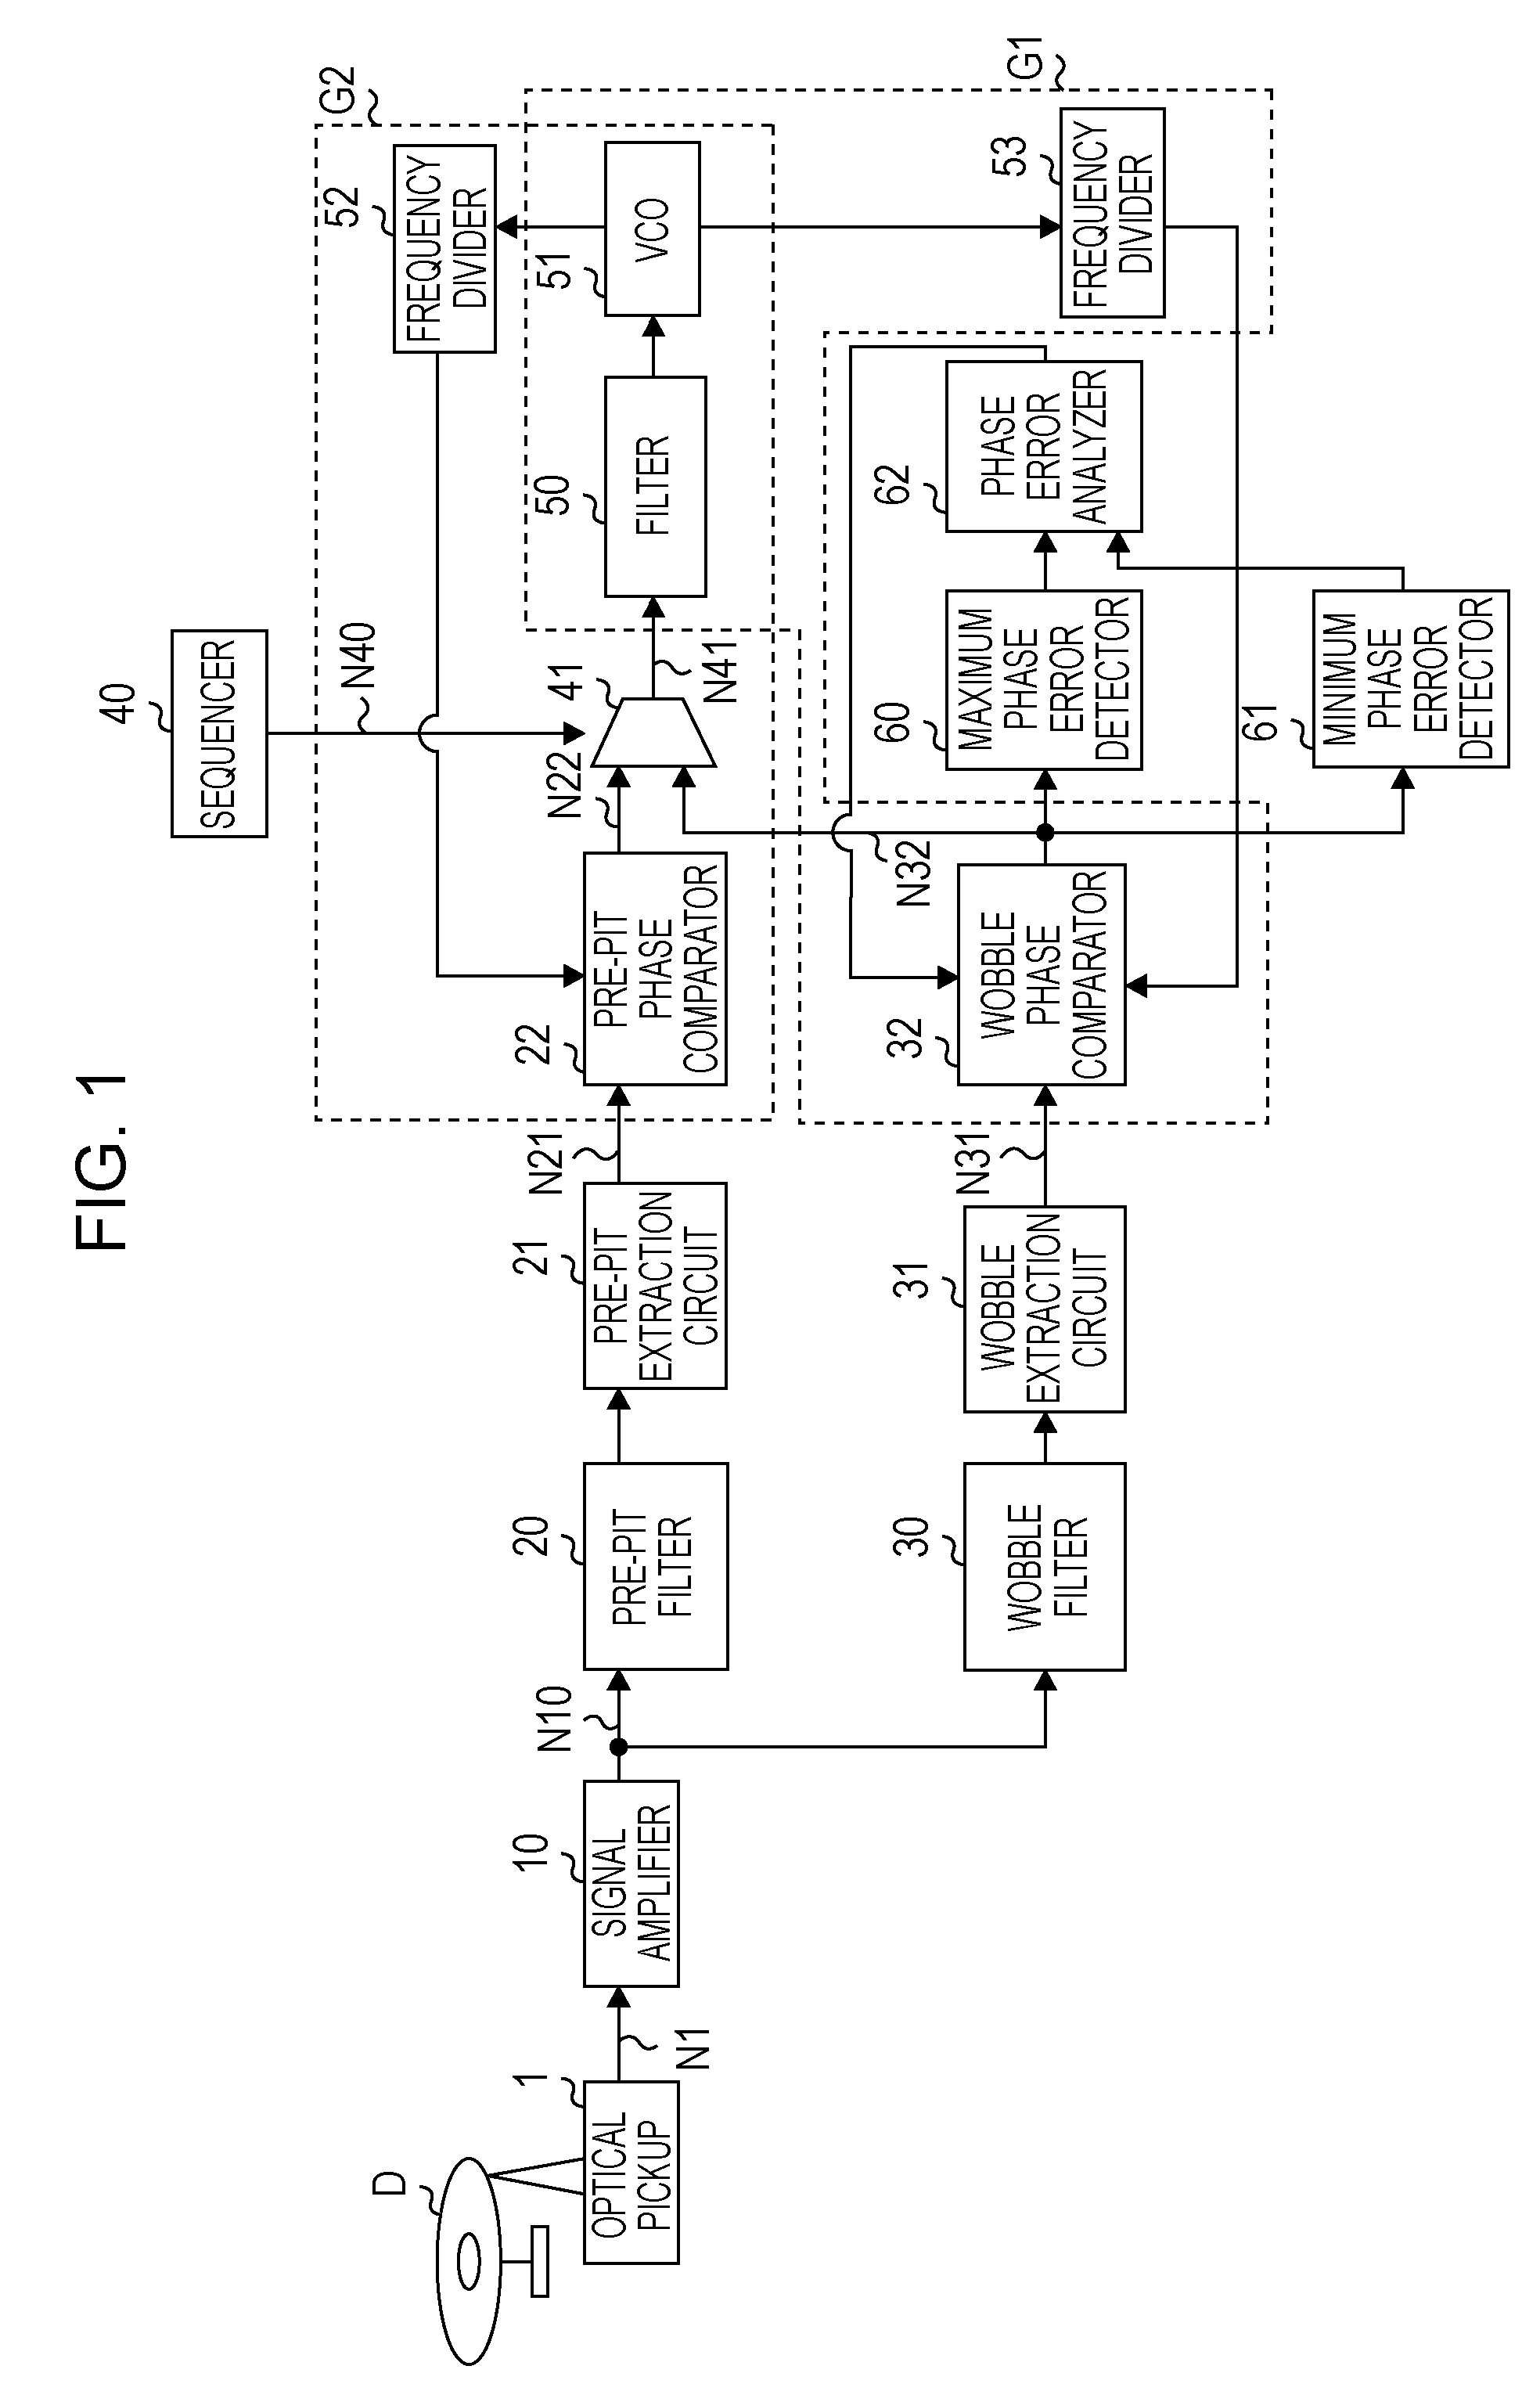 Optical disk recording method and optical disk recording apparatus